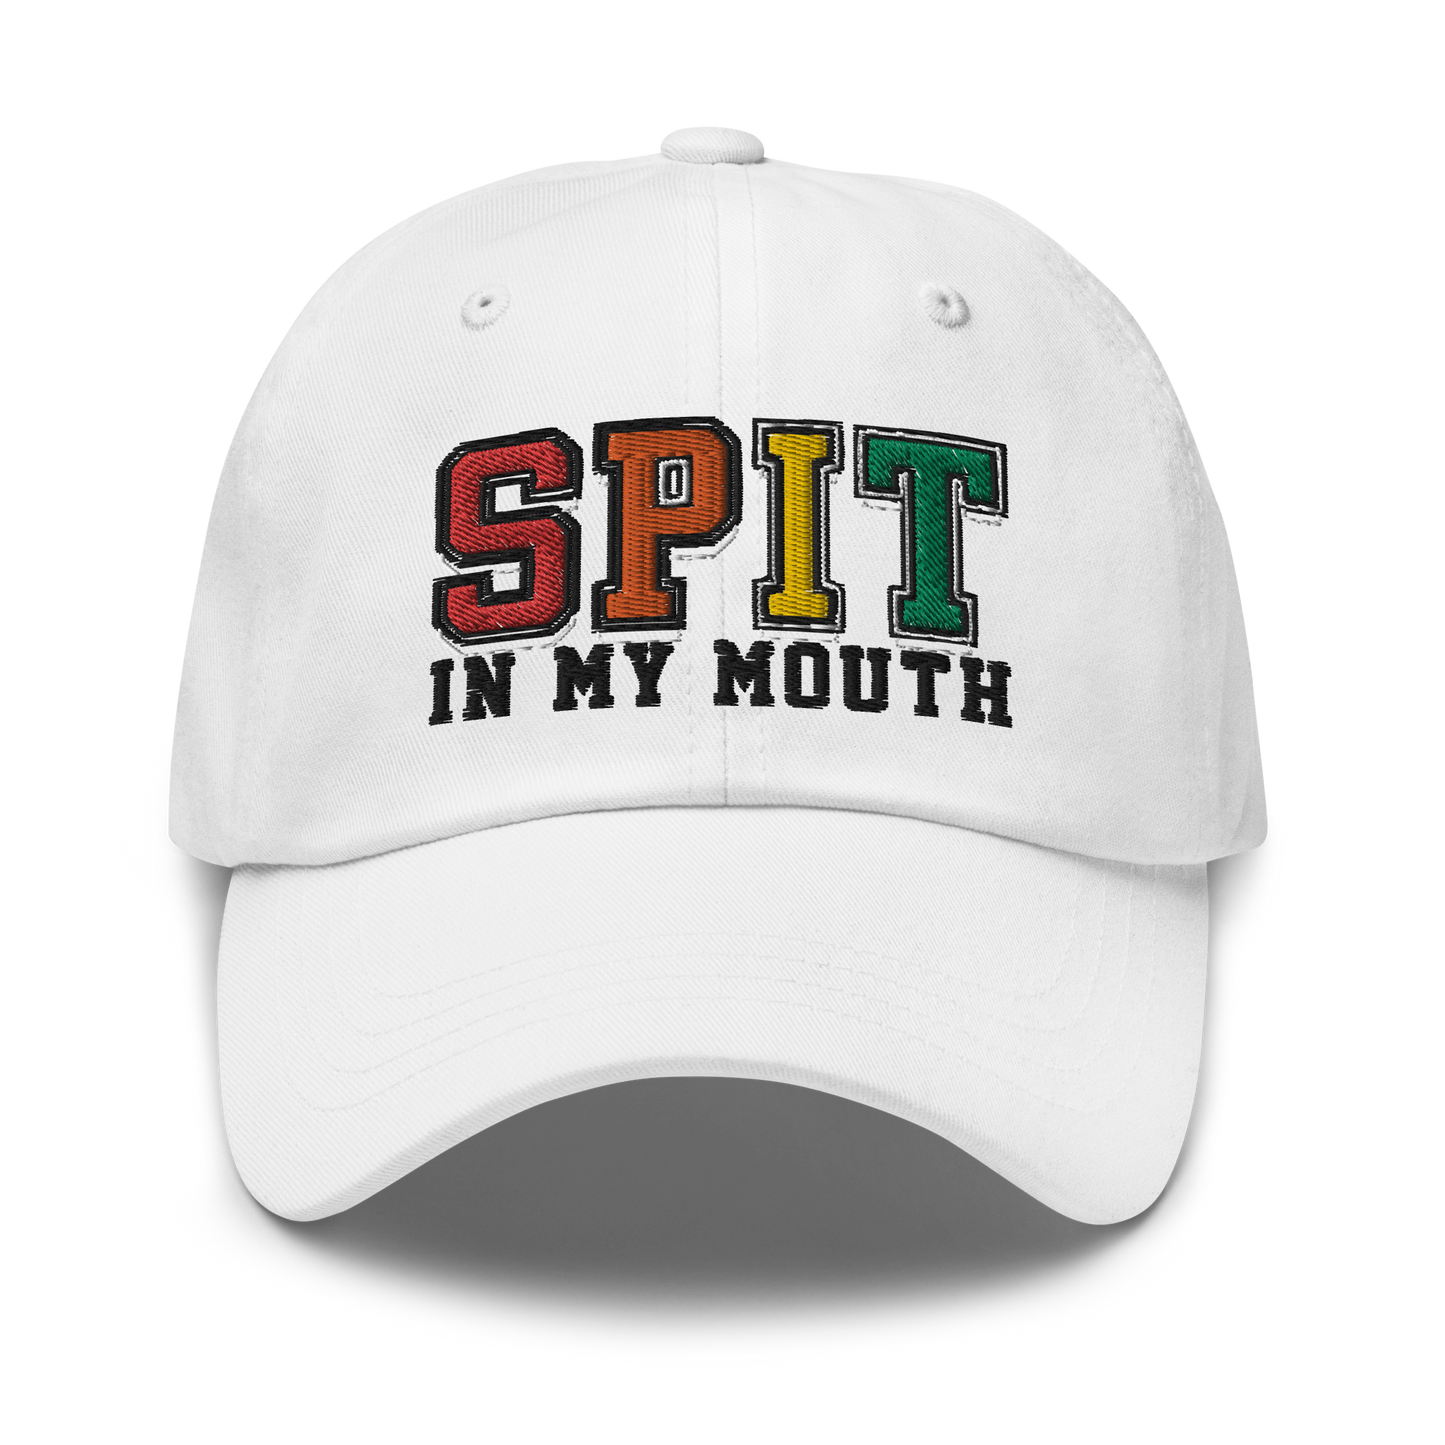 Spit In My Mouth Hat.